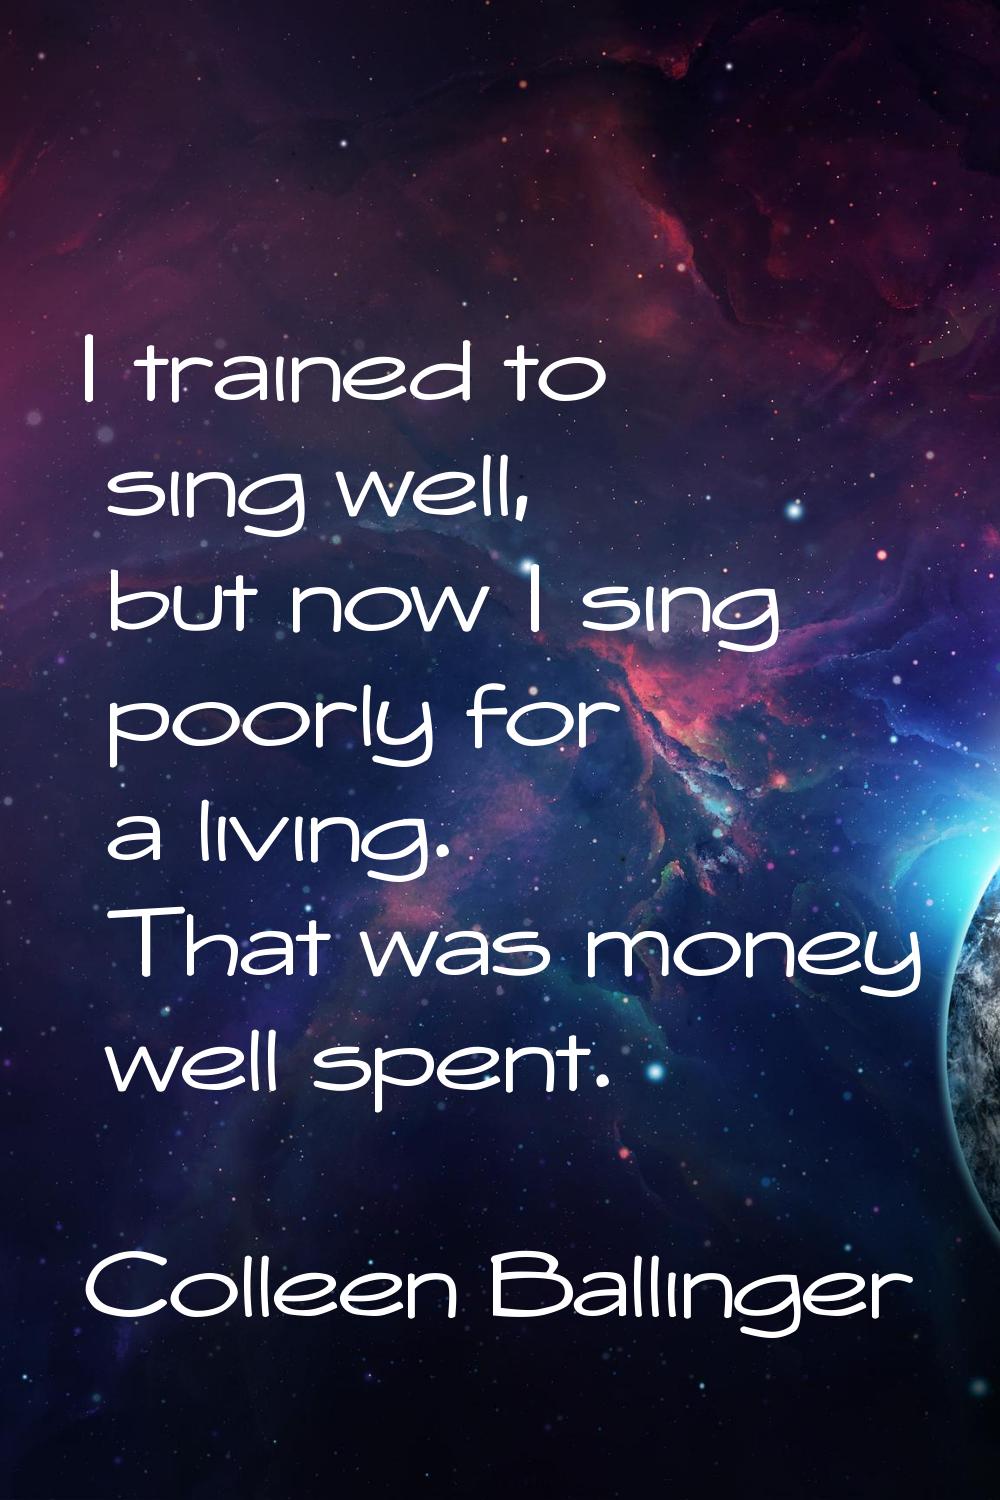 I trained to sing well, but now I sing poorly for a living. That was money well spent.